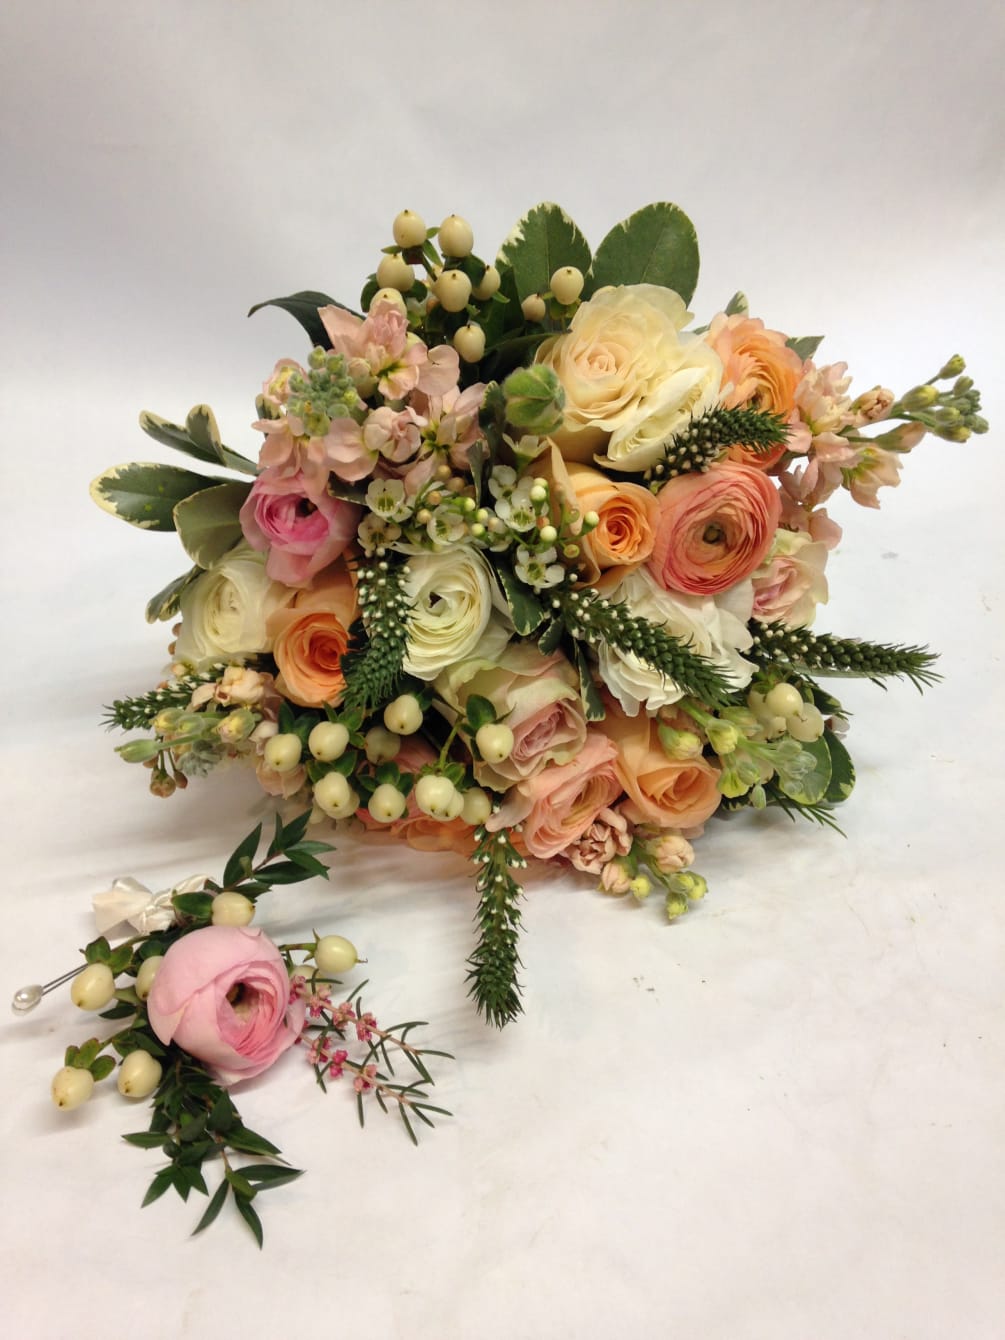 This stunning peach bridal bouquet features elegant ranunculus nestled into soft fillers.